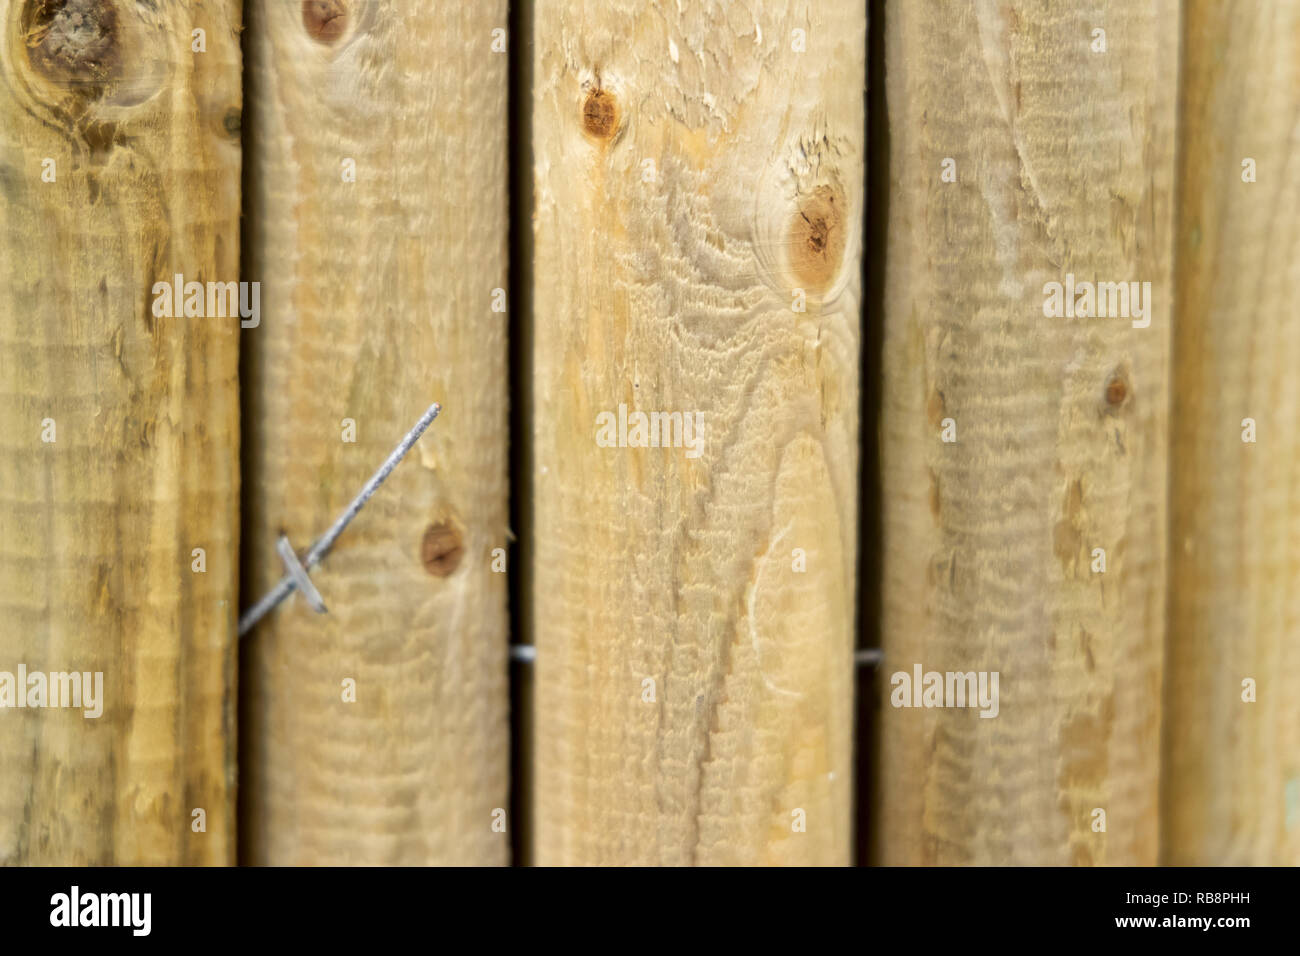 building material - post pole wood Stock Photo